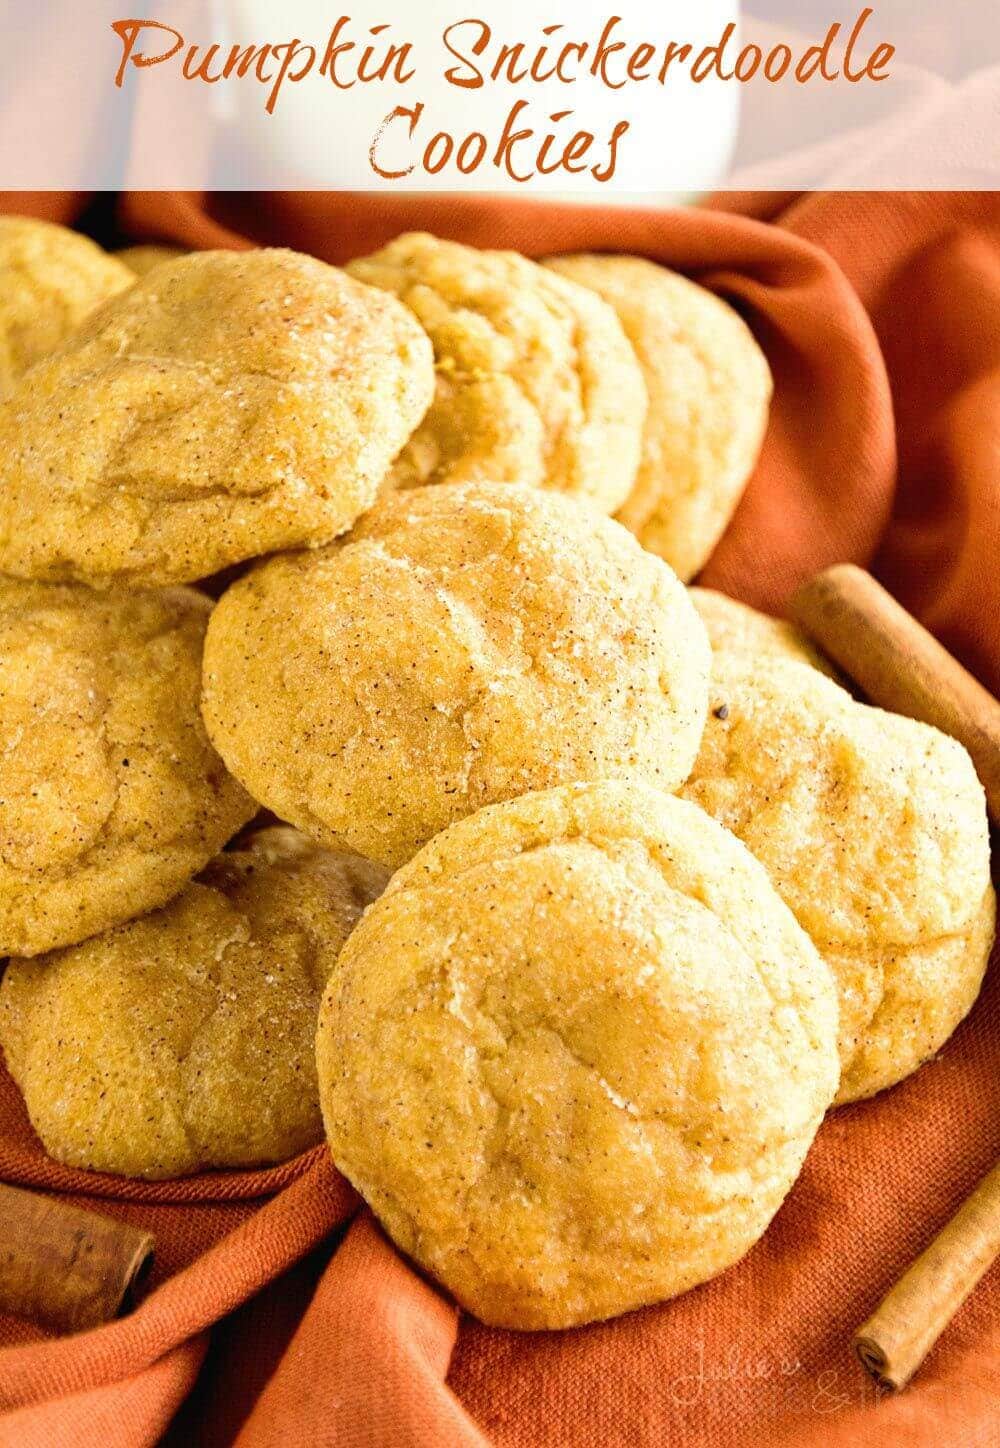 Pumpkin Snickerdoodle Cookies Recipe ~ Soft, Delicious Pumpkin Cookies Rolled in Cinnamon Sugar! The perfect fall treat!